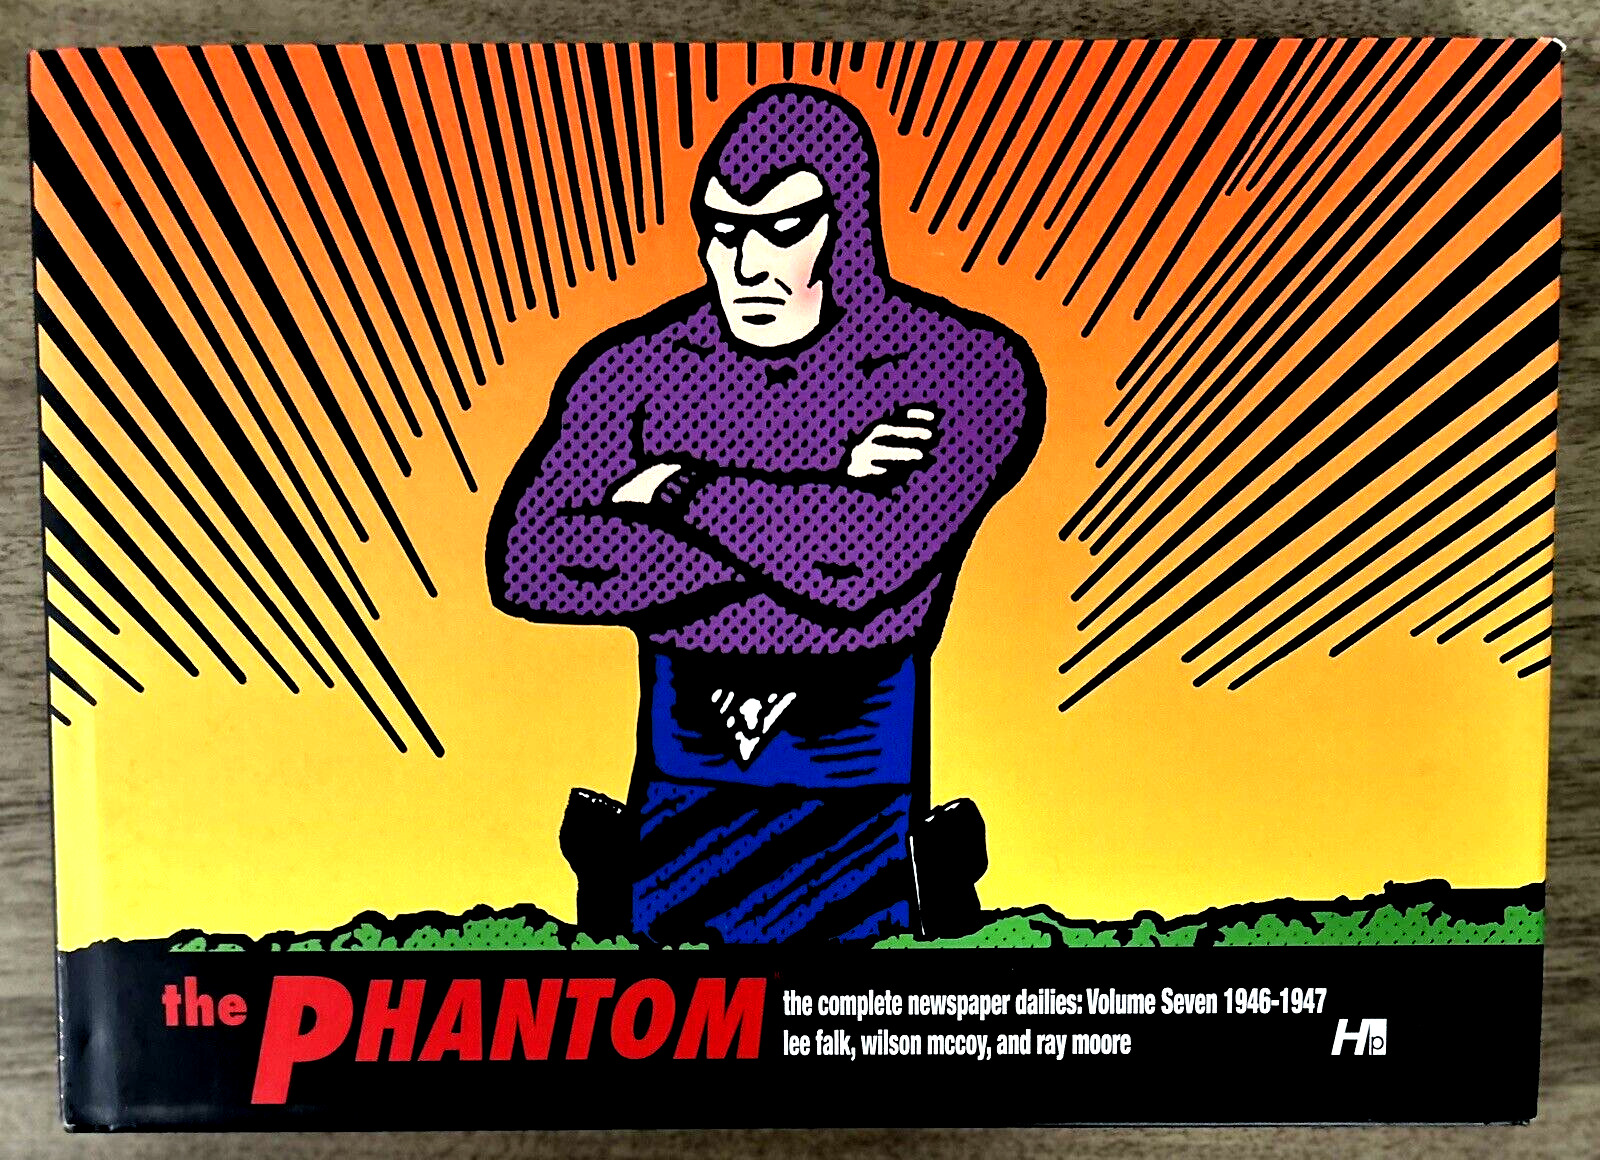 The Phantom-the Complete Newspaper Dailies Vol 7 by Lee Falk Hardcover